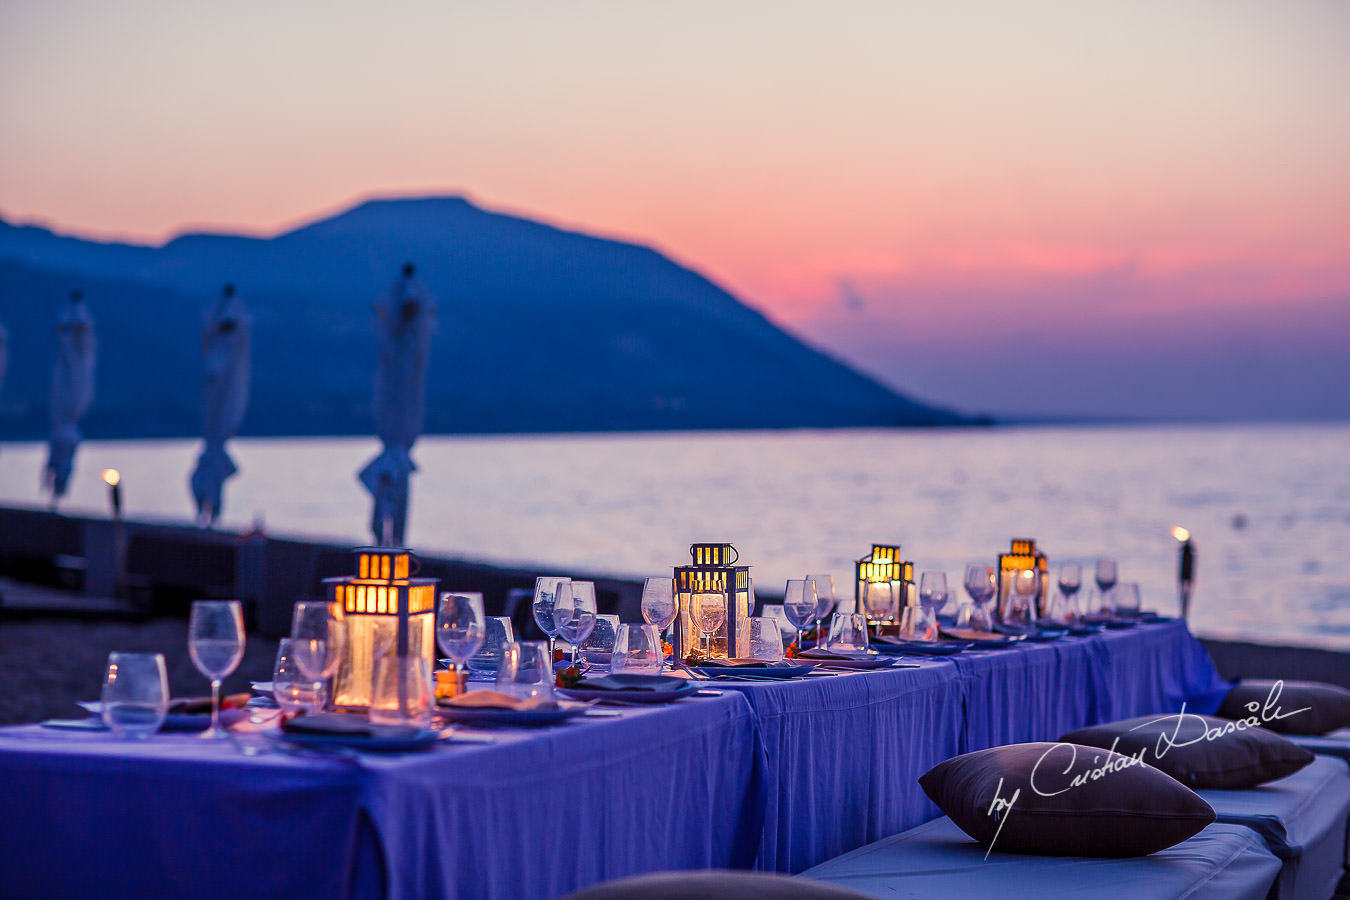 Breathtaking sunset view at the beautiful Anassa Hotel photographed by Cyprus Photographer Cristian Dascalu.